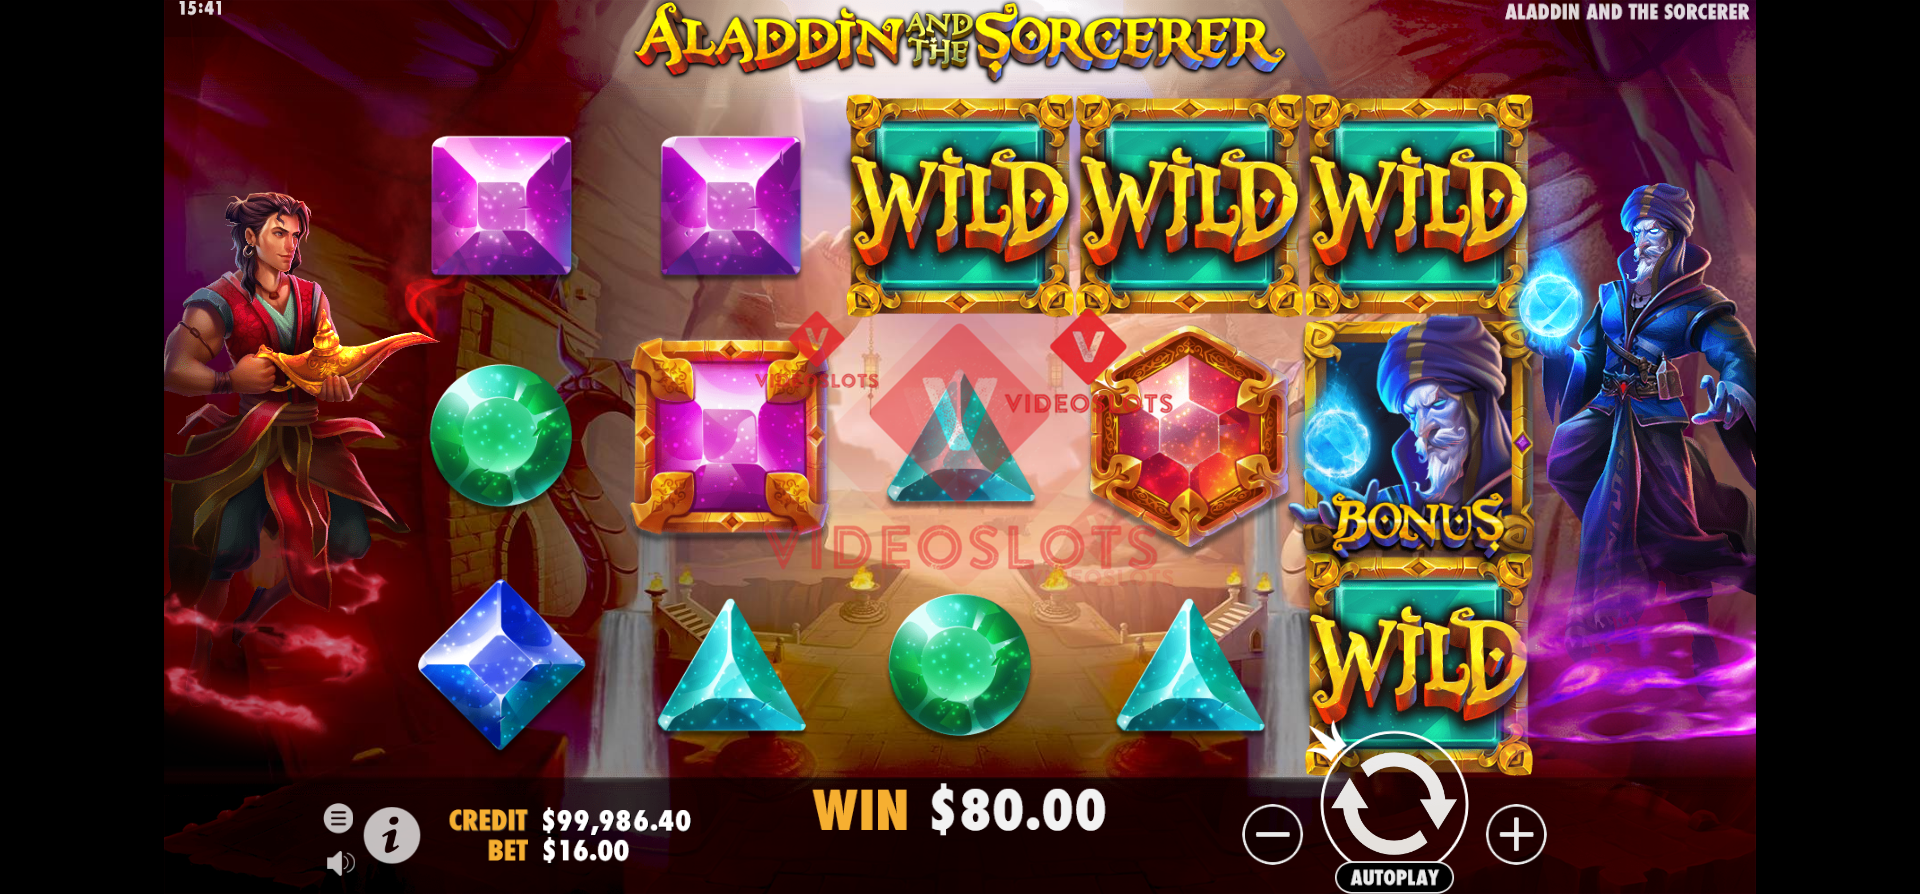 Base Game for Aladdin and The Sorcerer slot by Pragmatic Play